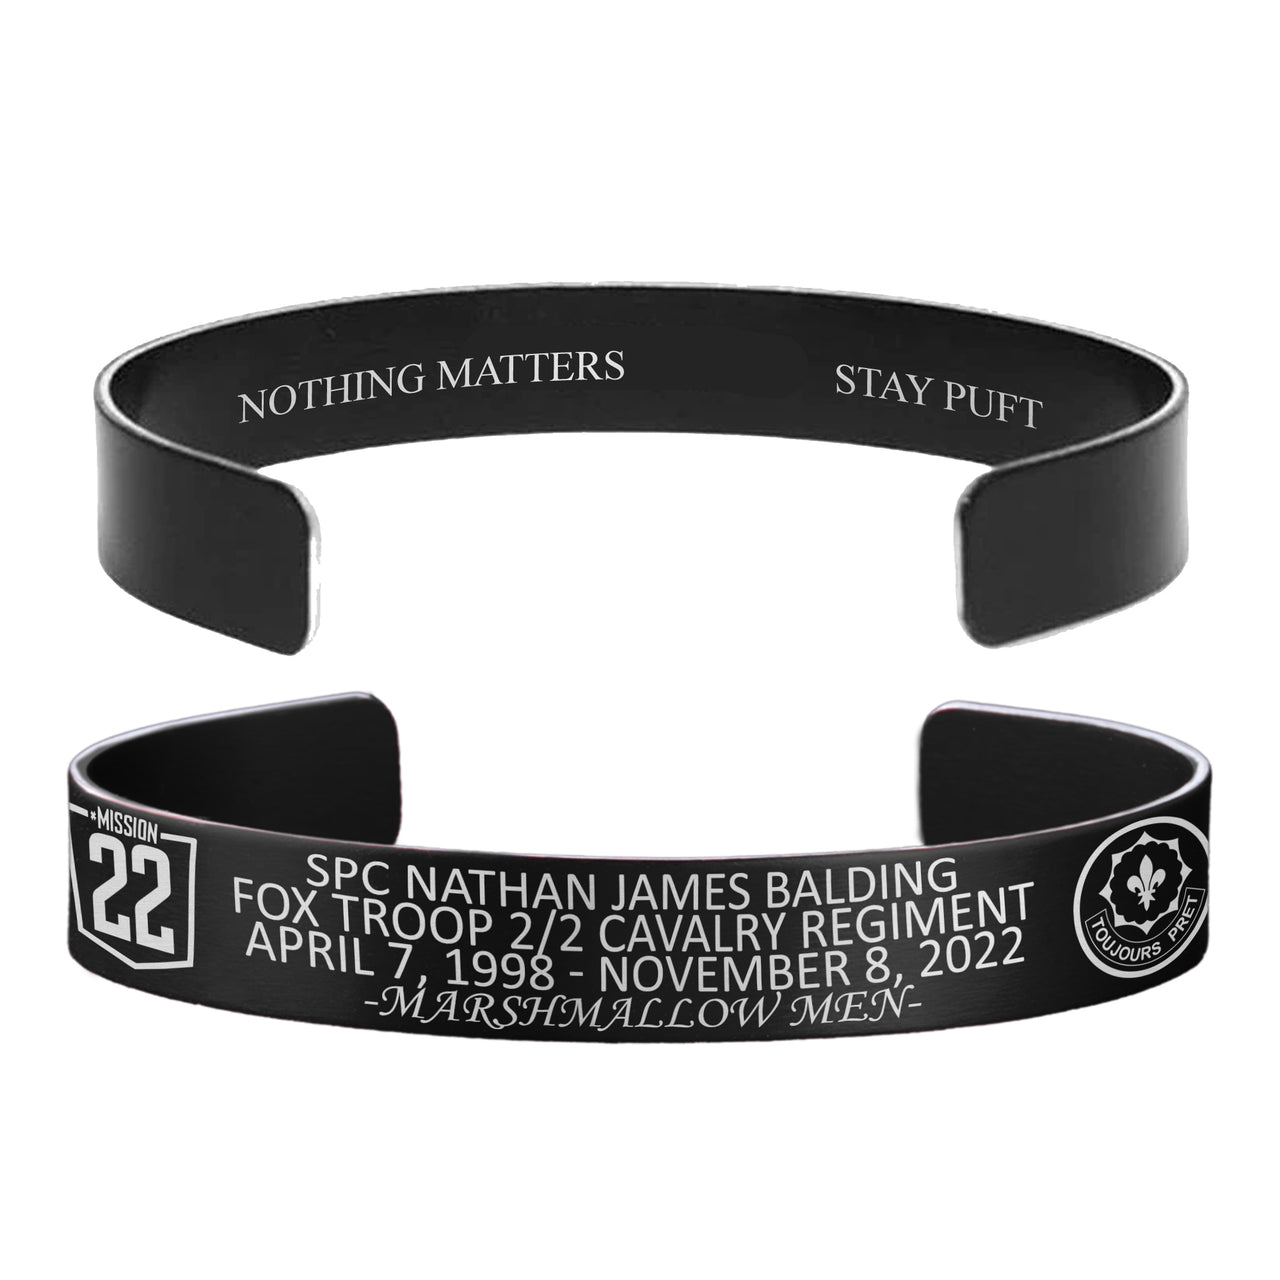 SPC Nathan James Balding Memorial Band – Hosted by the Balding Family